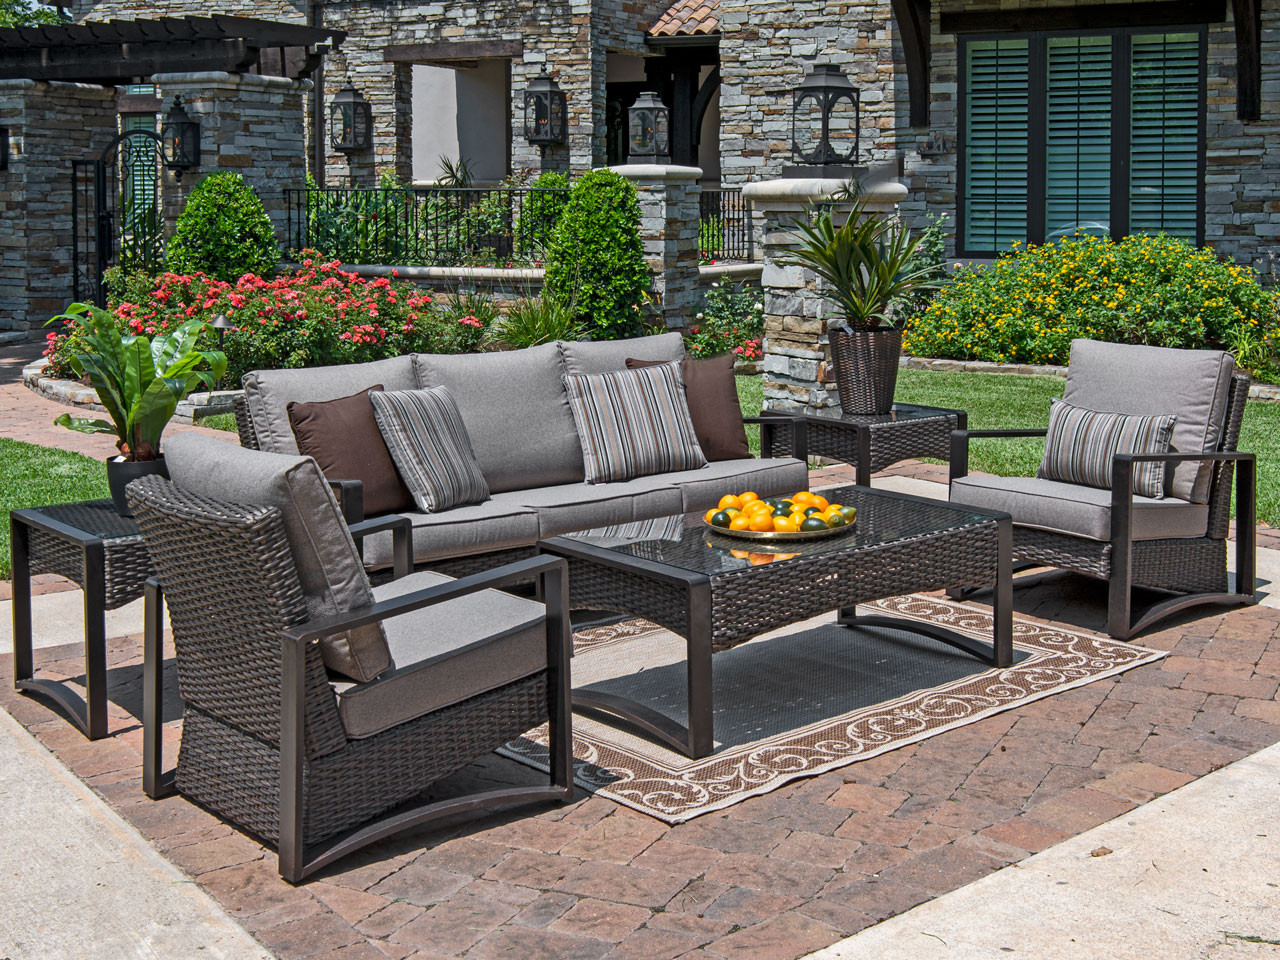 Sienna Aged Bronze Aluminum and Sea Leaf Outdoor Wicker with Chestnut Cushion 4 Pc. Sofa Group with 52 x 28 in. Coffee Table